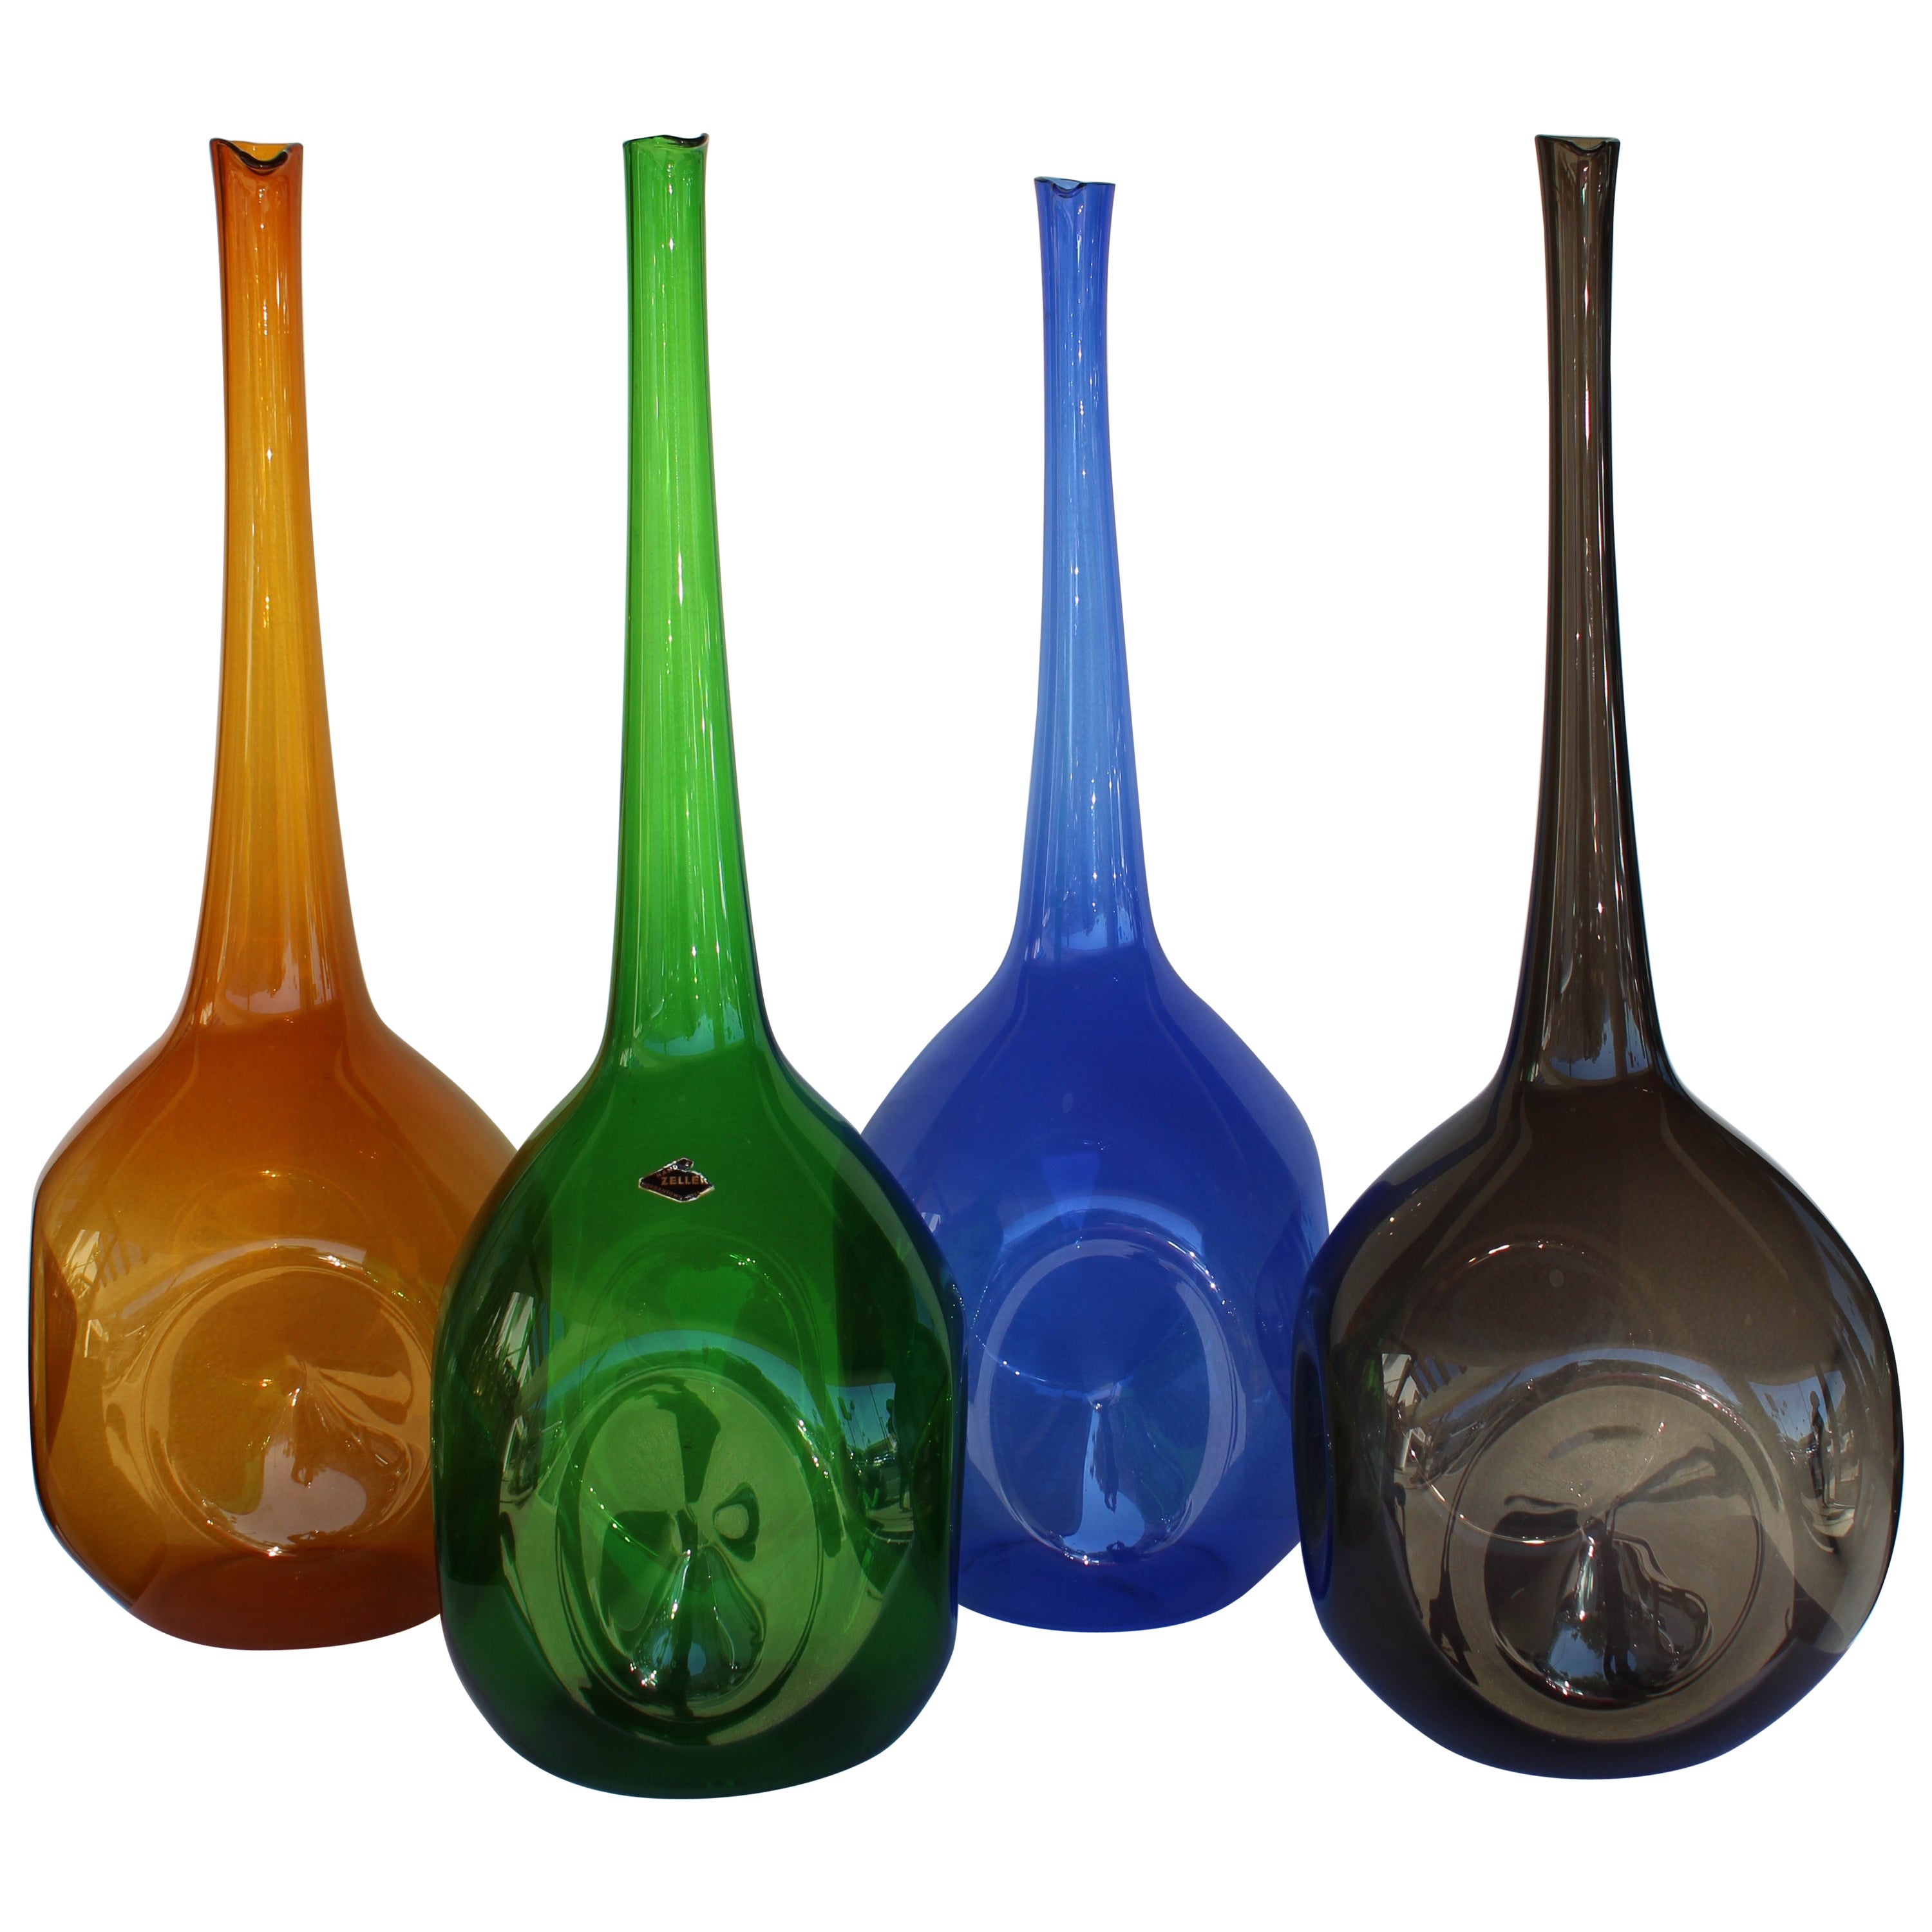 Four Large Hand Blown Glass Vessels by the Zeller Glass Company For Sale